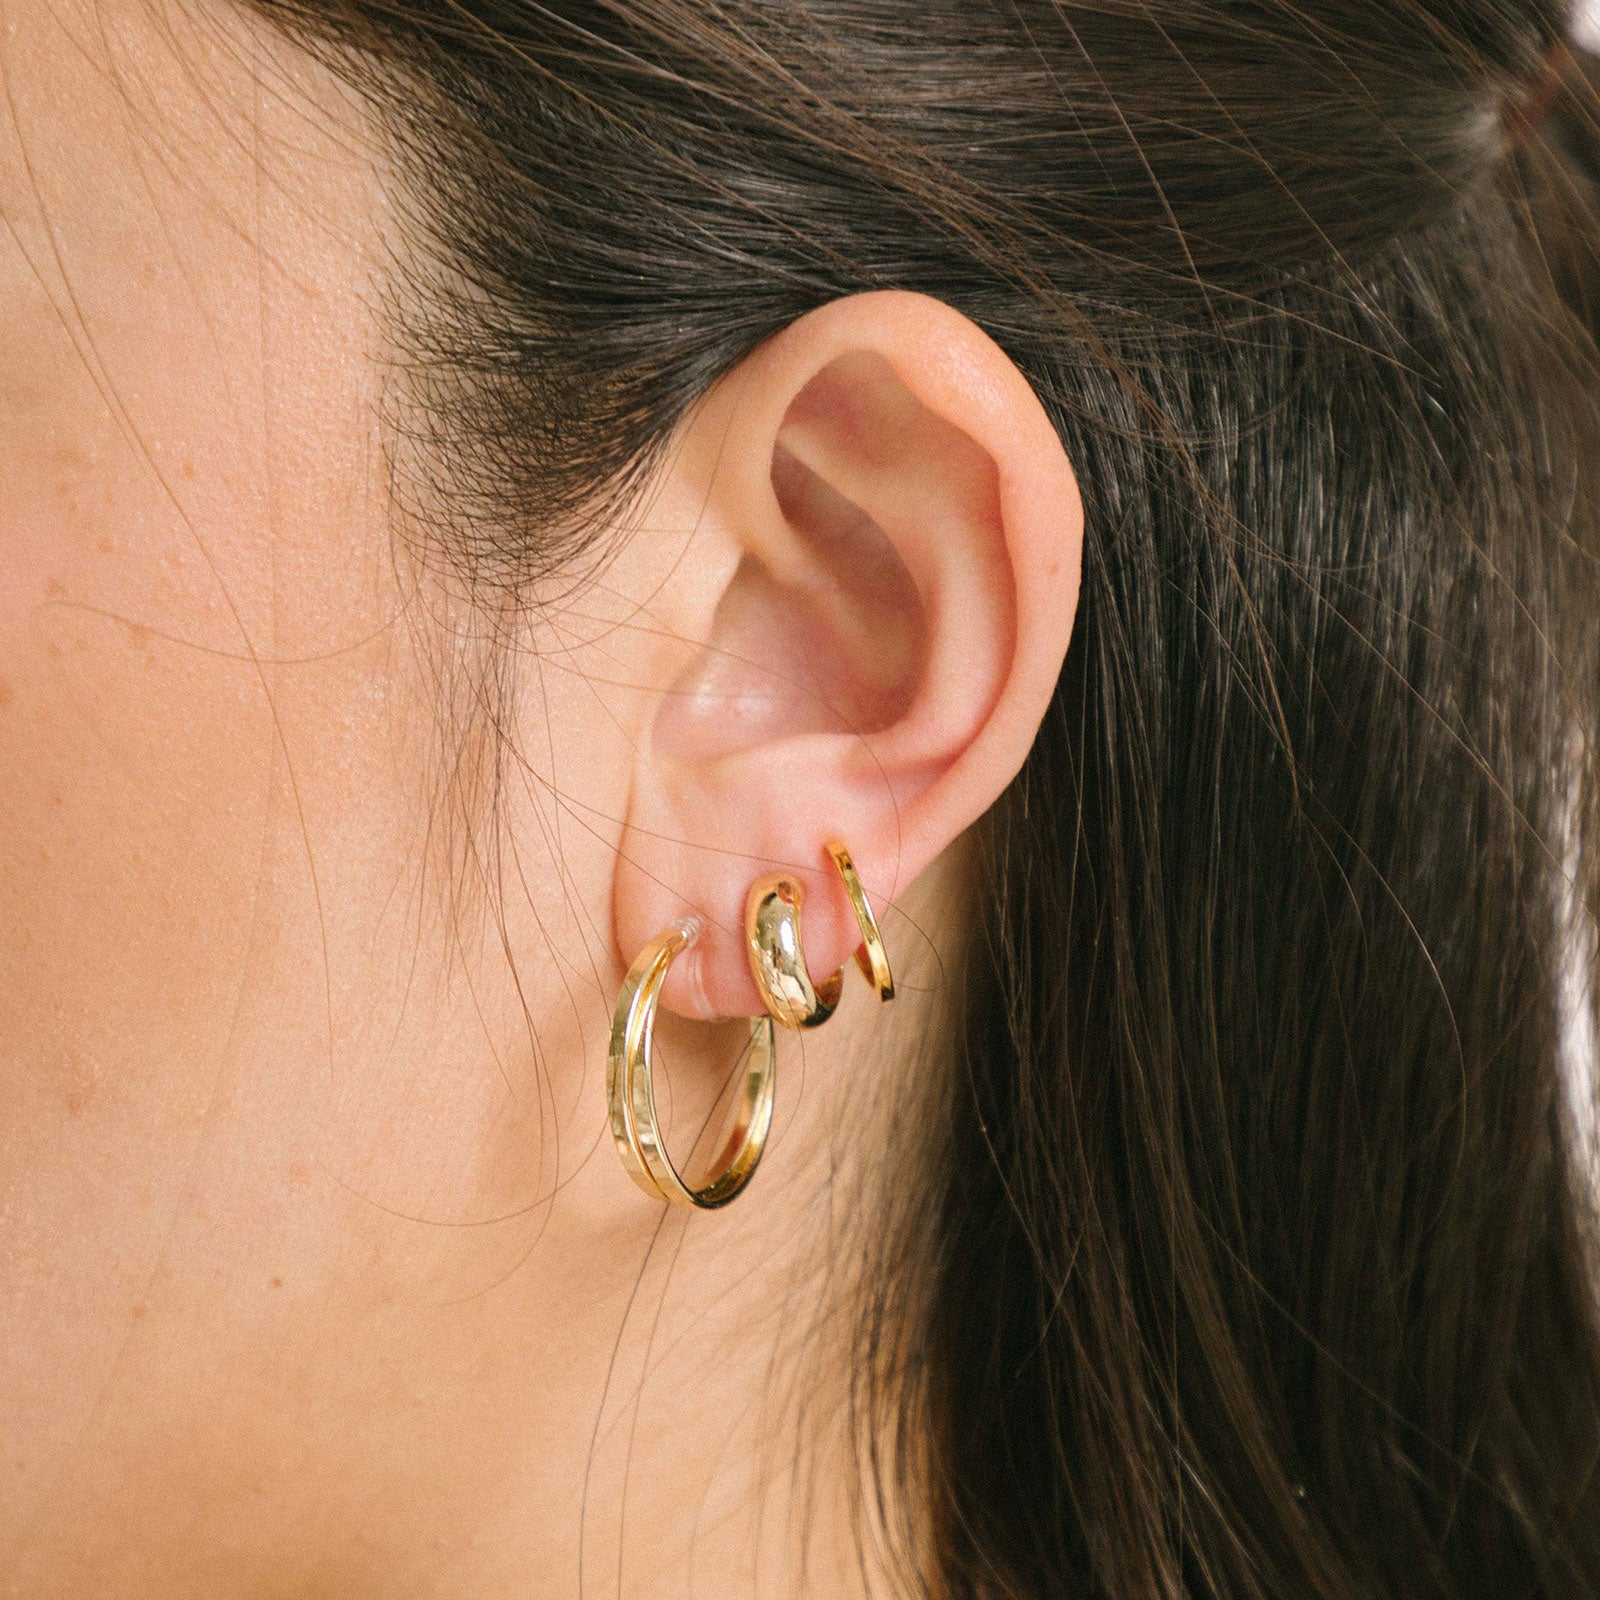 A model wearing the Everyday Essentials Set comes with three pairs of earrings featuring an Invisible Resin, Sliding Spring and Mosquito Coil closure. The set includes a Simple Gold Huggie Clip-On, Mini Hoop Earrings, and Gold Cassie Hoop Earrings, all crafted of Gold tone plated alloy, Stainless steel, or Gold Tone Metal Alloy. It is also available in Silver.